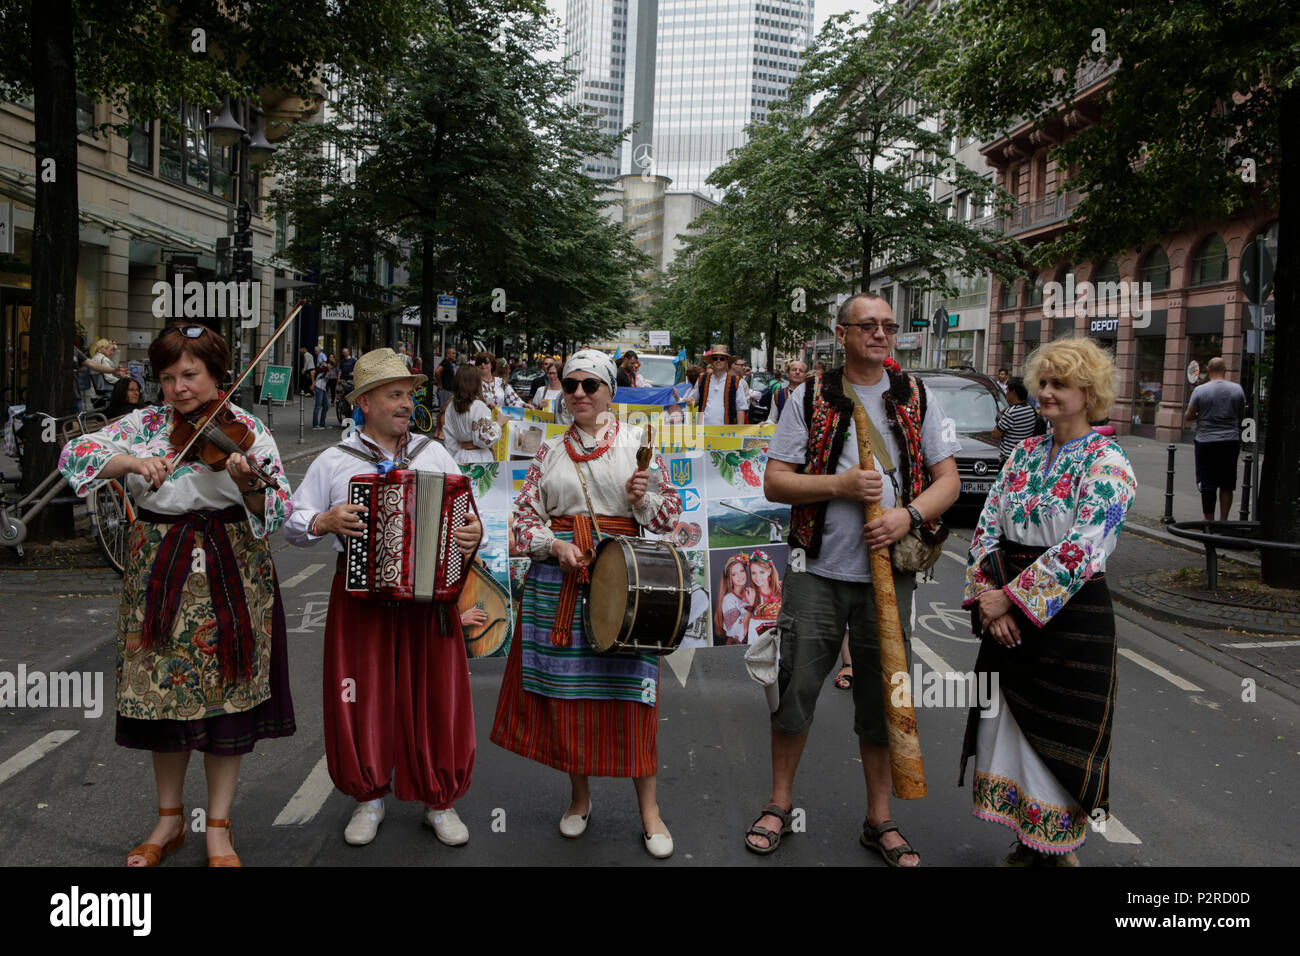 Frankfurt, Germany. 16th June 2018. A group of Ukrainian people play traditional music at the parade. Thousands of people participated and watched the 2018 Parade der Kulturen (Parade of Cultures), organised by the Frankfurter Jugendring (Frankfurt Youth Council). The parade with participants from over 40 different groups of expat and cultural organisations showcased the cultural diversity of Frankfurt. Credit: Michael Debets/Alamy Live News Stock Photo